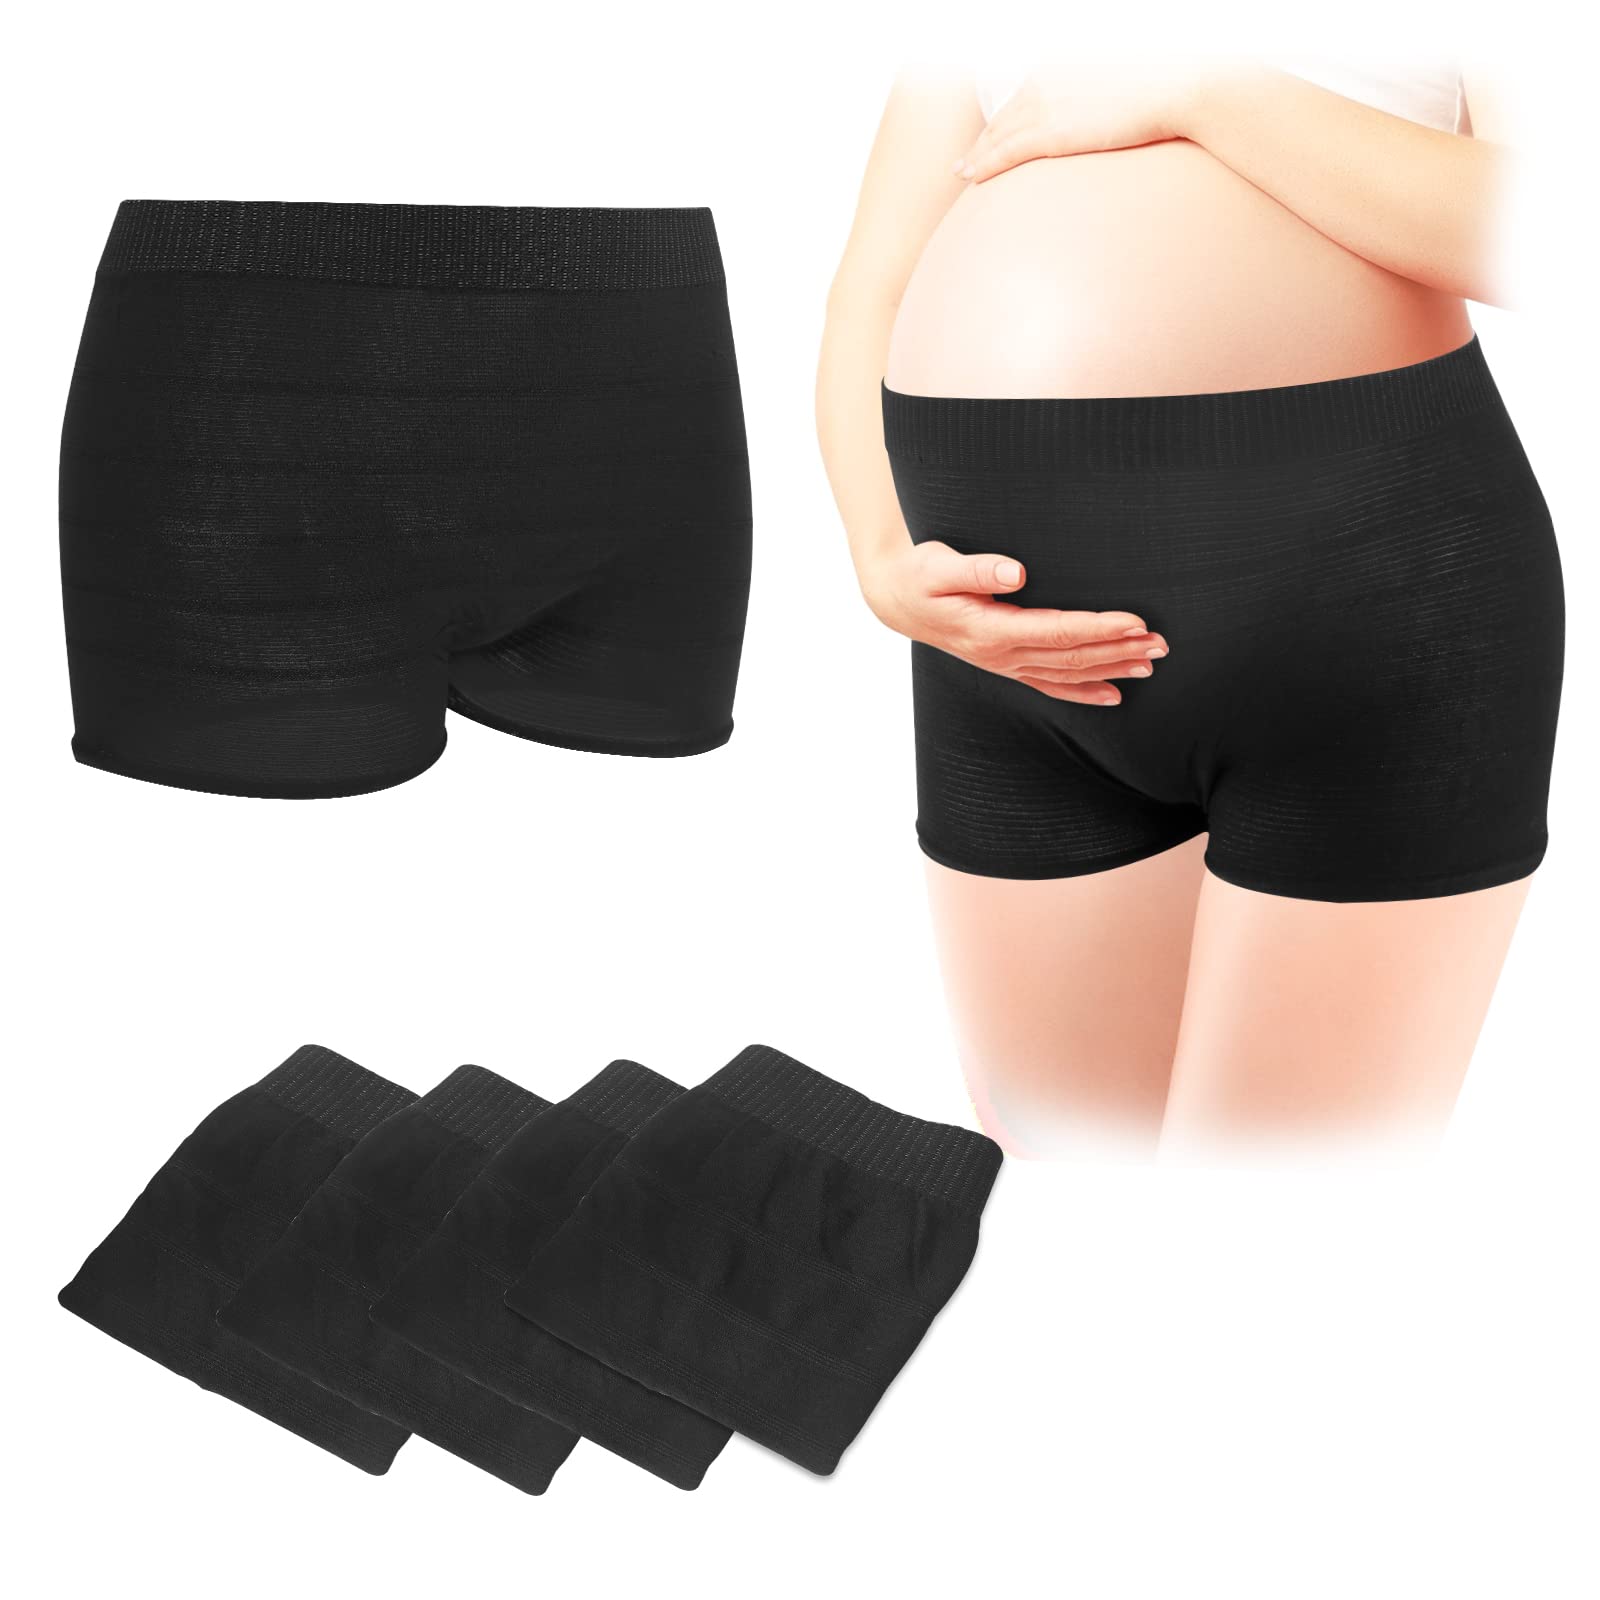 Maternity Briefs - Maternity Knickers, Shorties For Pregnant Women